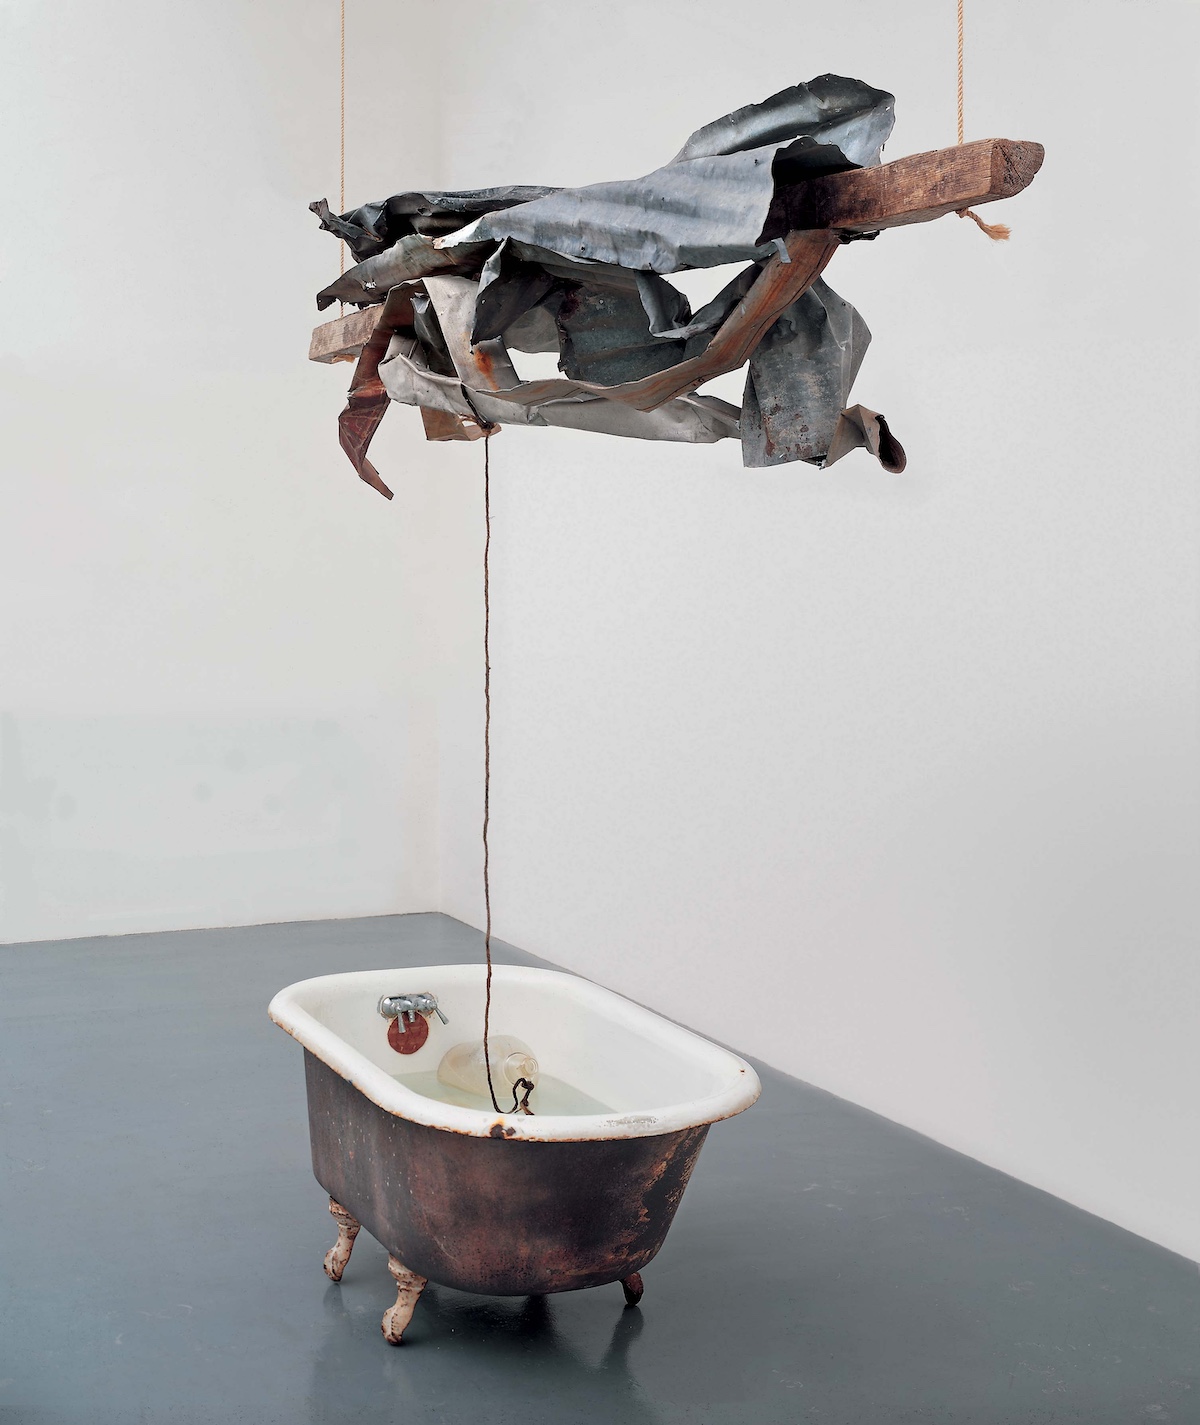 Robert Rauschenberg Sor Aqua (Venetian), 1973 Water-filled bathtub, wood, found metal, rope, and glass jug 120 1/4 x 120 1/8 x 33 7/8 inches (305.5 x 305 x 86 cm) The Museum of Fine Arts, Houston Museum purchase funded by the Caroline Wiess Law Foundation ©Robert Rauschenberg Foundation